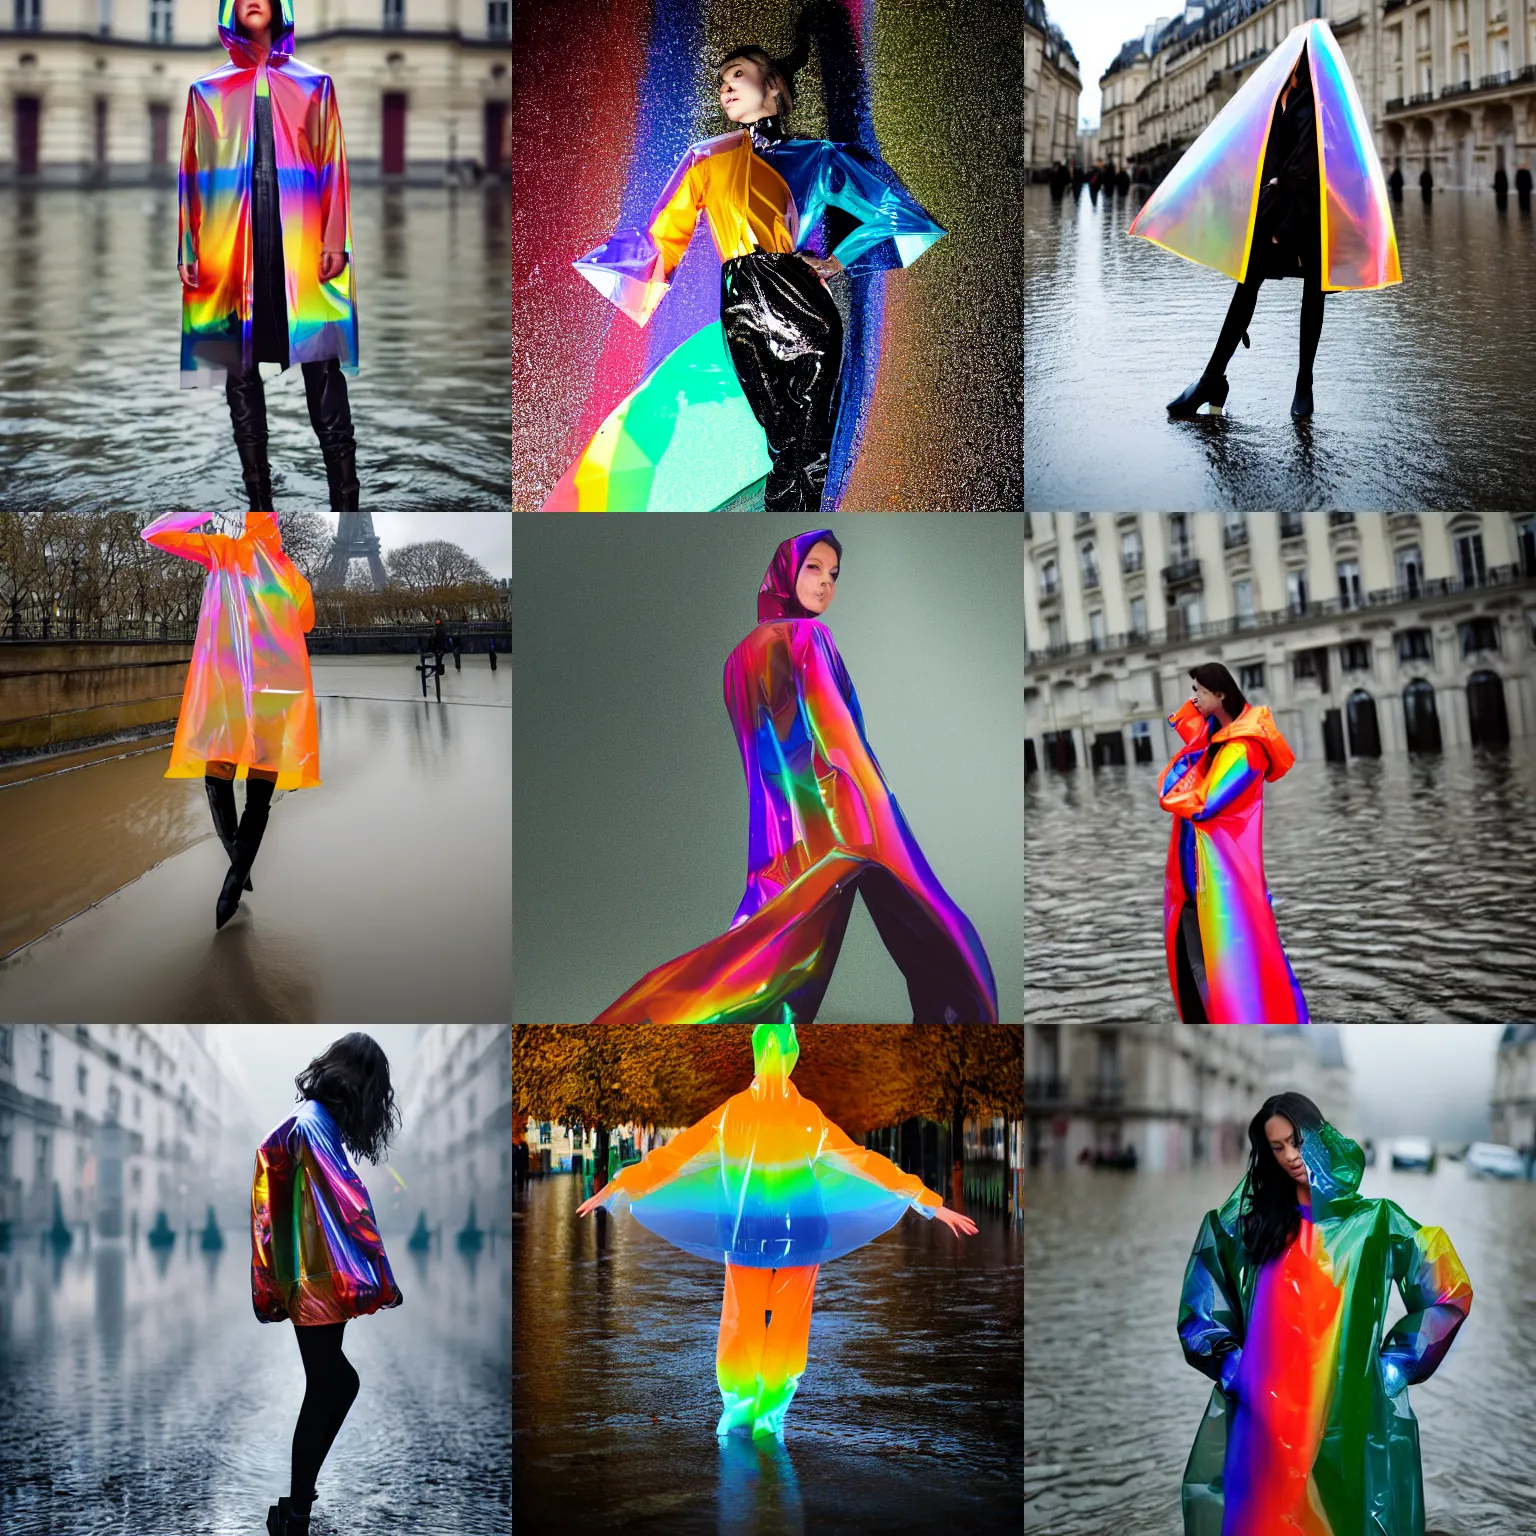 Prompt: Fall lookbook fashion extreme closeup portrait photoshoot of figure dancing in waist high in heavy nighttime paris floods, water to waste, wearing a translucent refracting rainbow diffusion wet plastic zaha hadid designed specular highlights raincoat by Nabbteeri, épaule devant pose, ultra realistic, Kodak , 4K, 75mm lens, three point perspective, , chiaroscuro, highly detailed, by moma